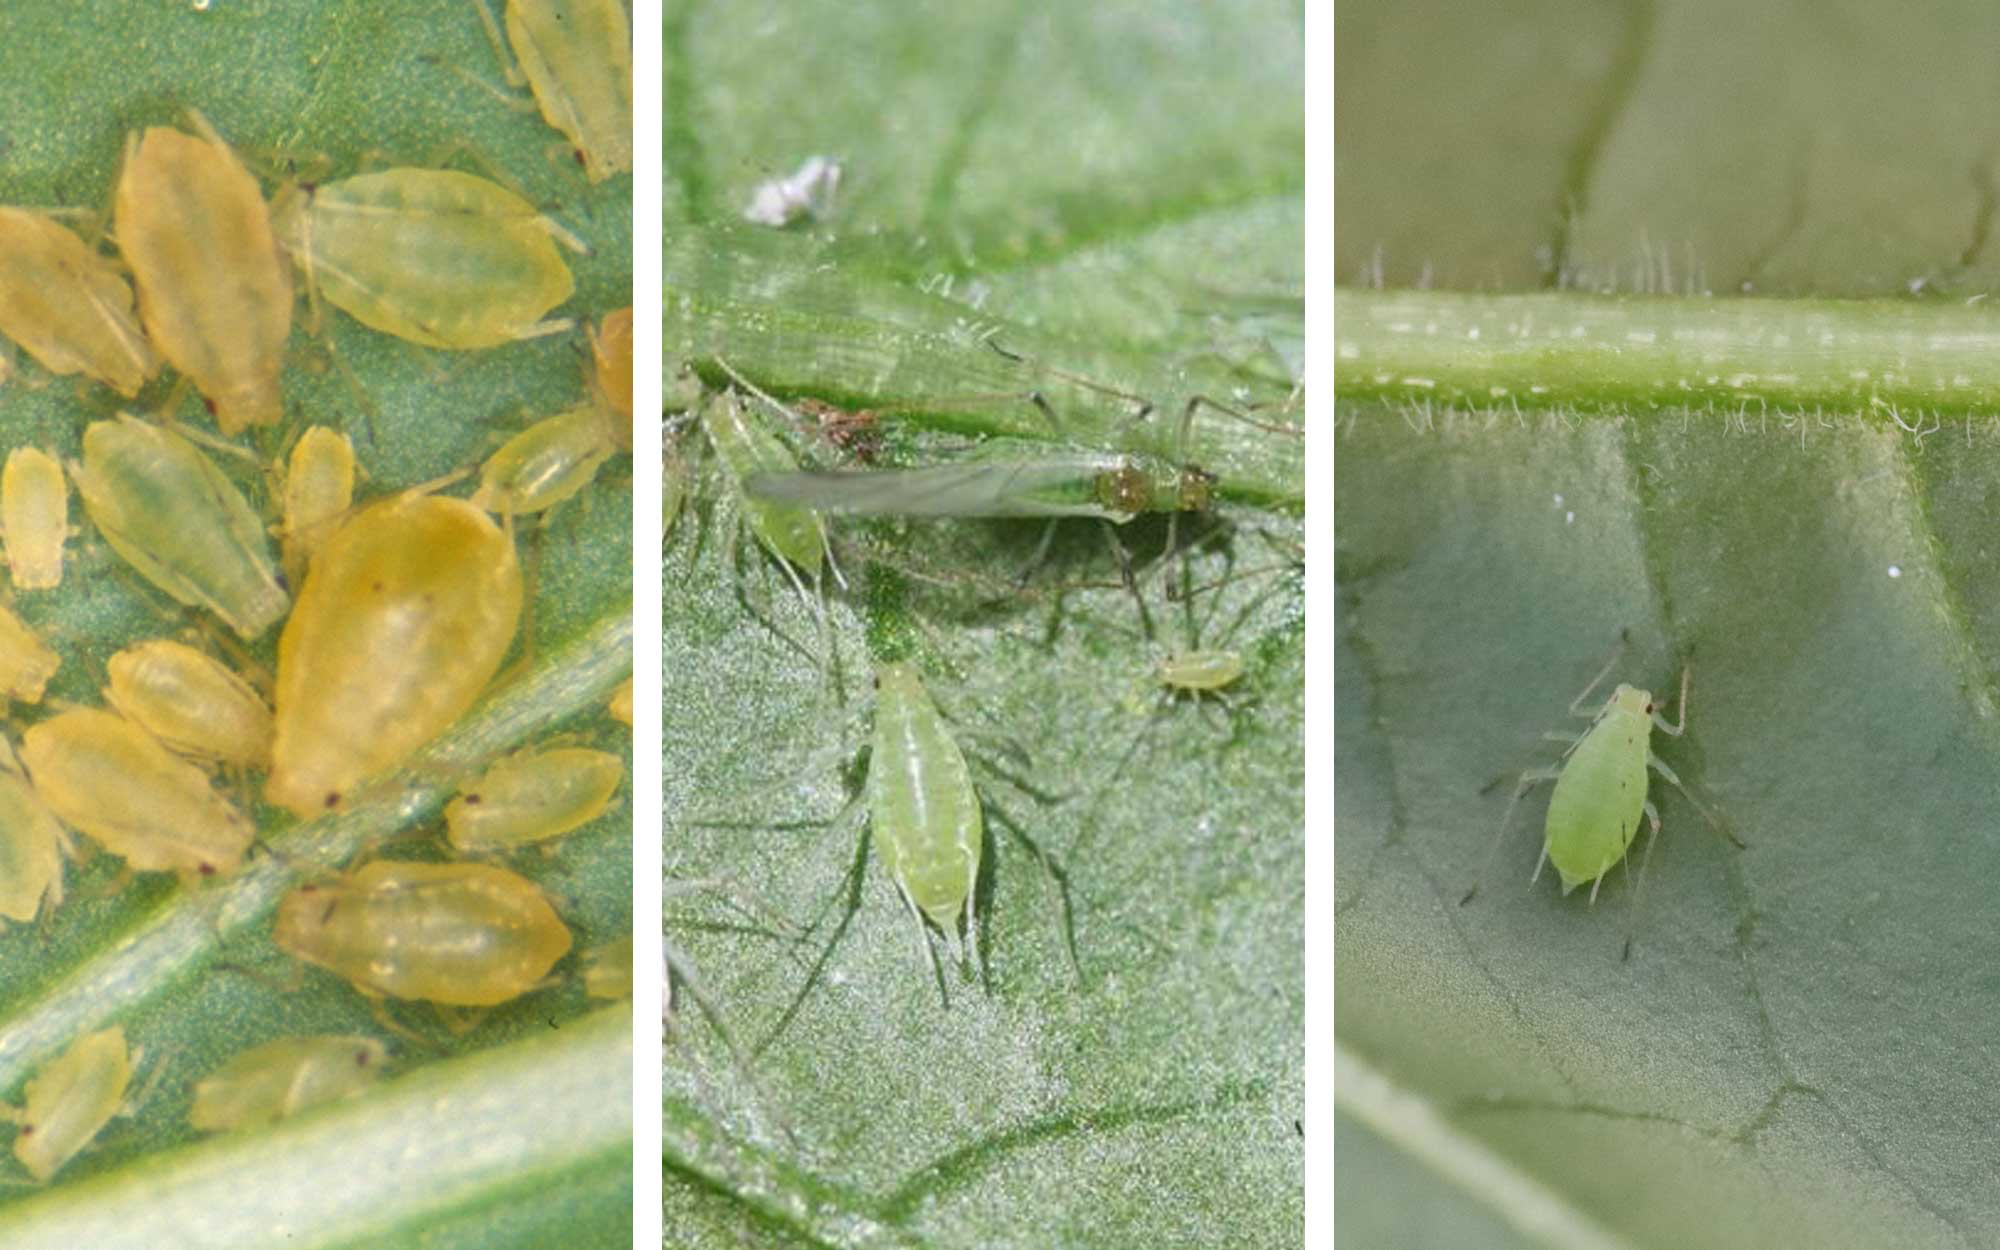 Three common aphids. From left: Green peach aphid colony. Potato aphid colony. Foxglove aphid on the underside of a pepper leaf.